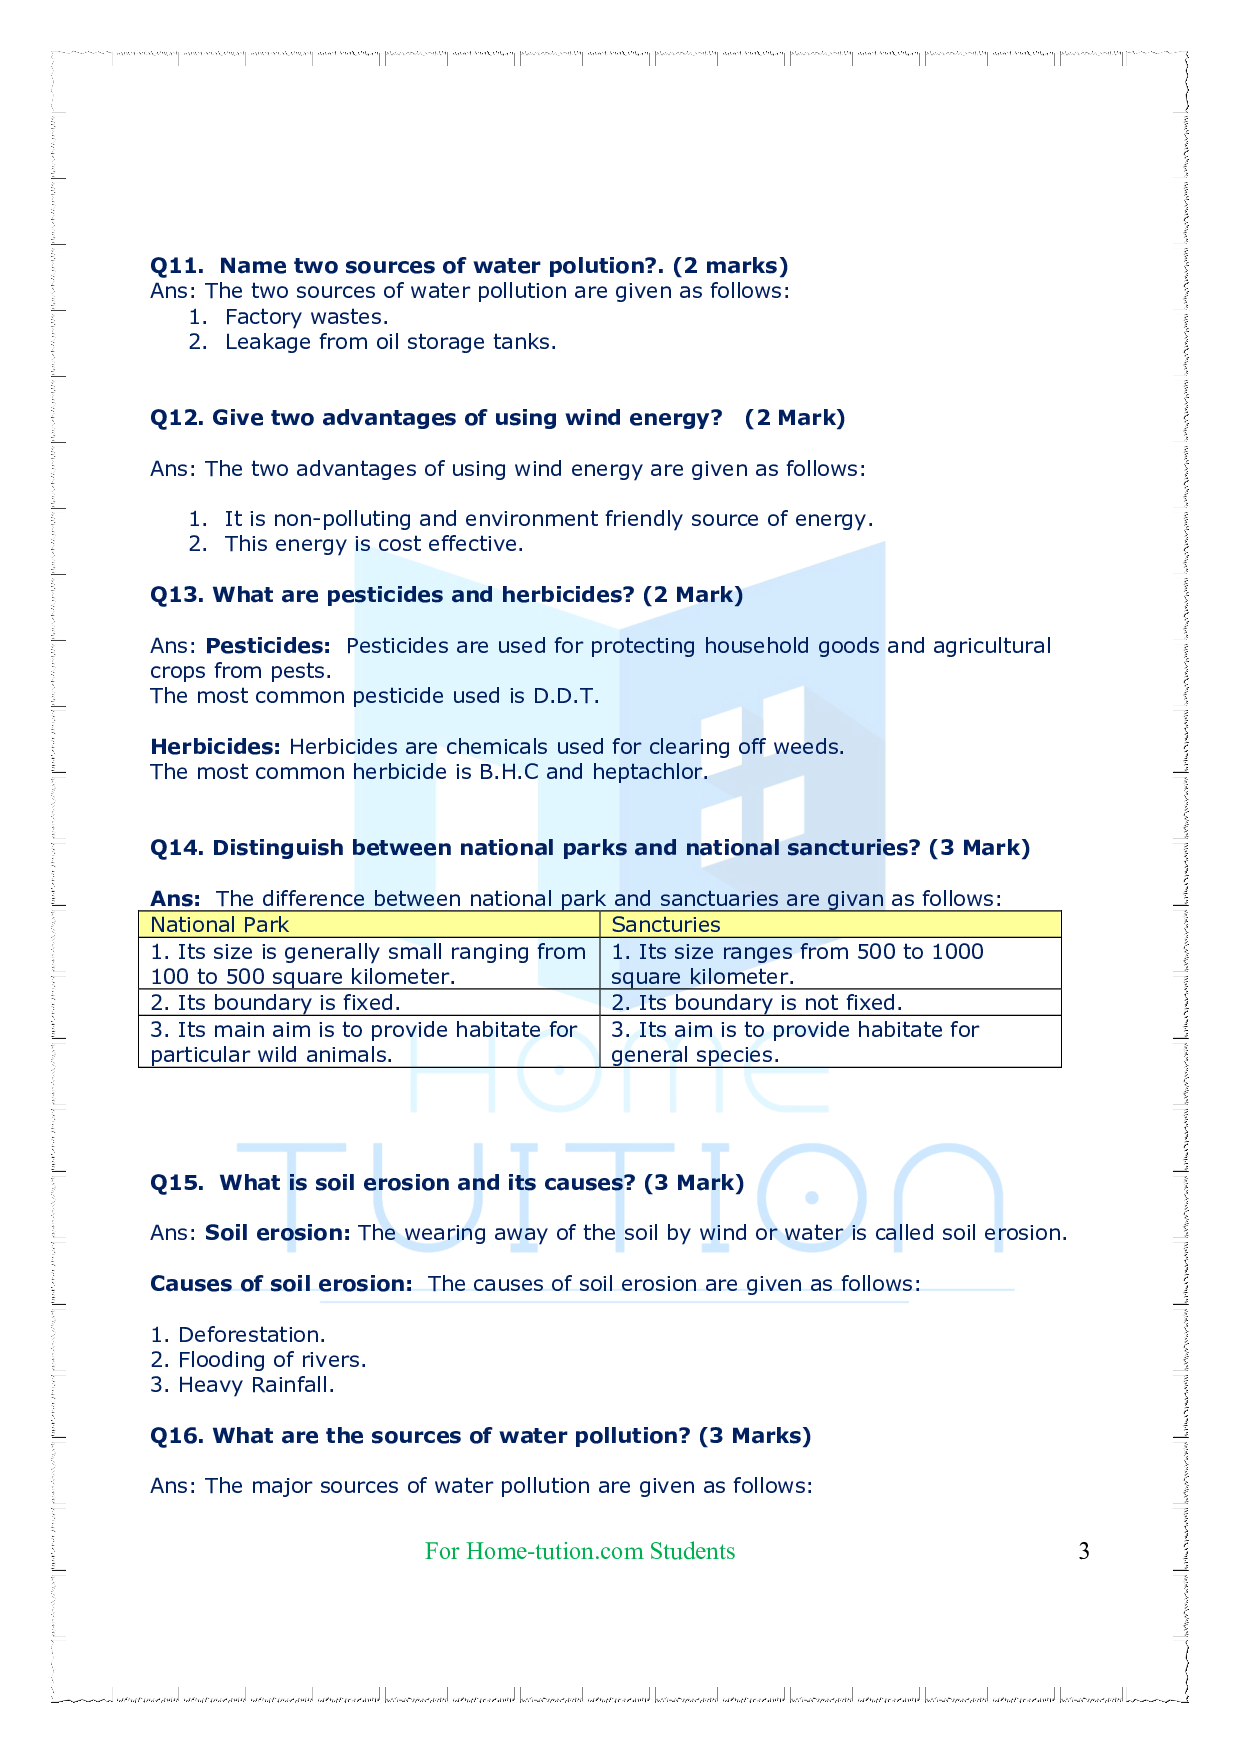 Chapter-16 Sustainable Management of Natural Resource Questions